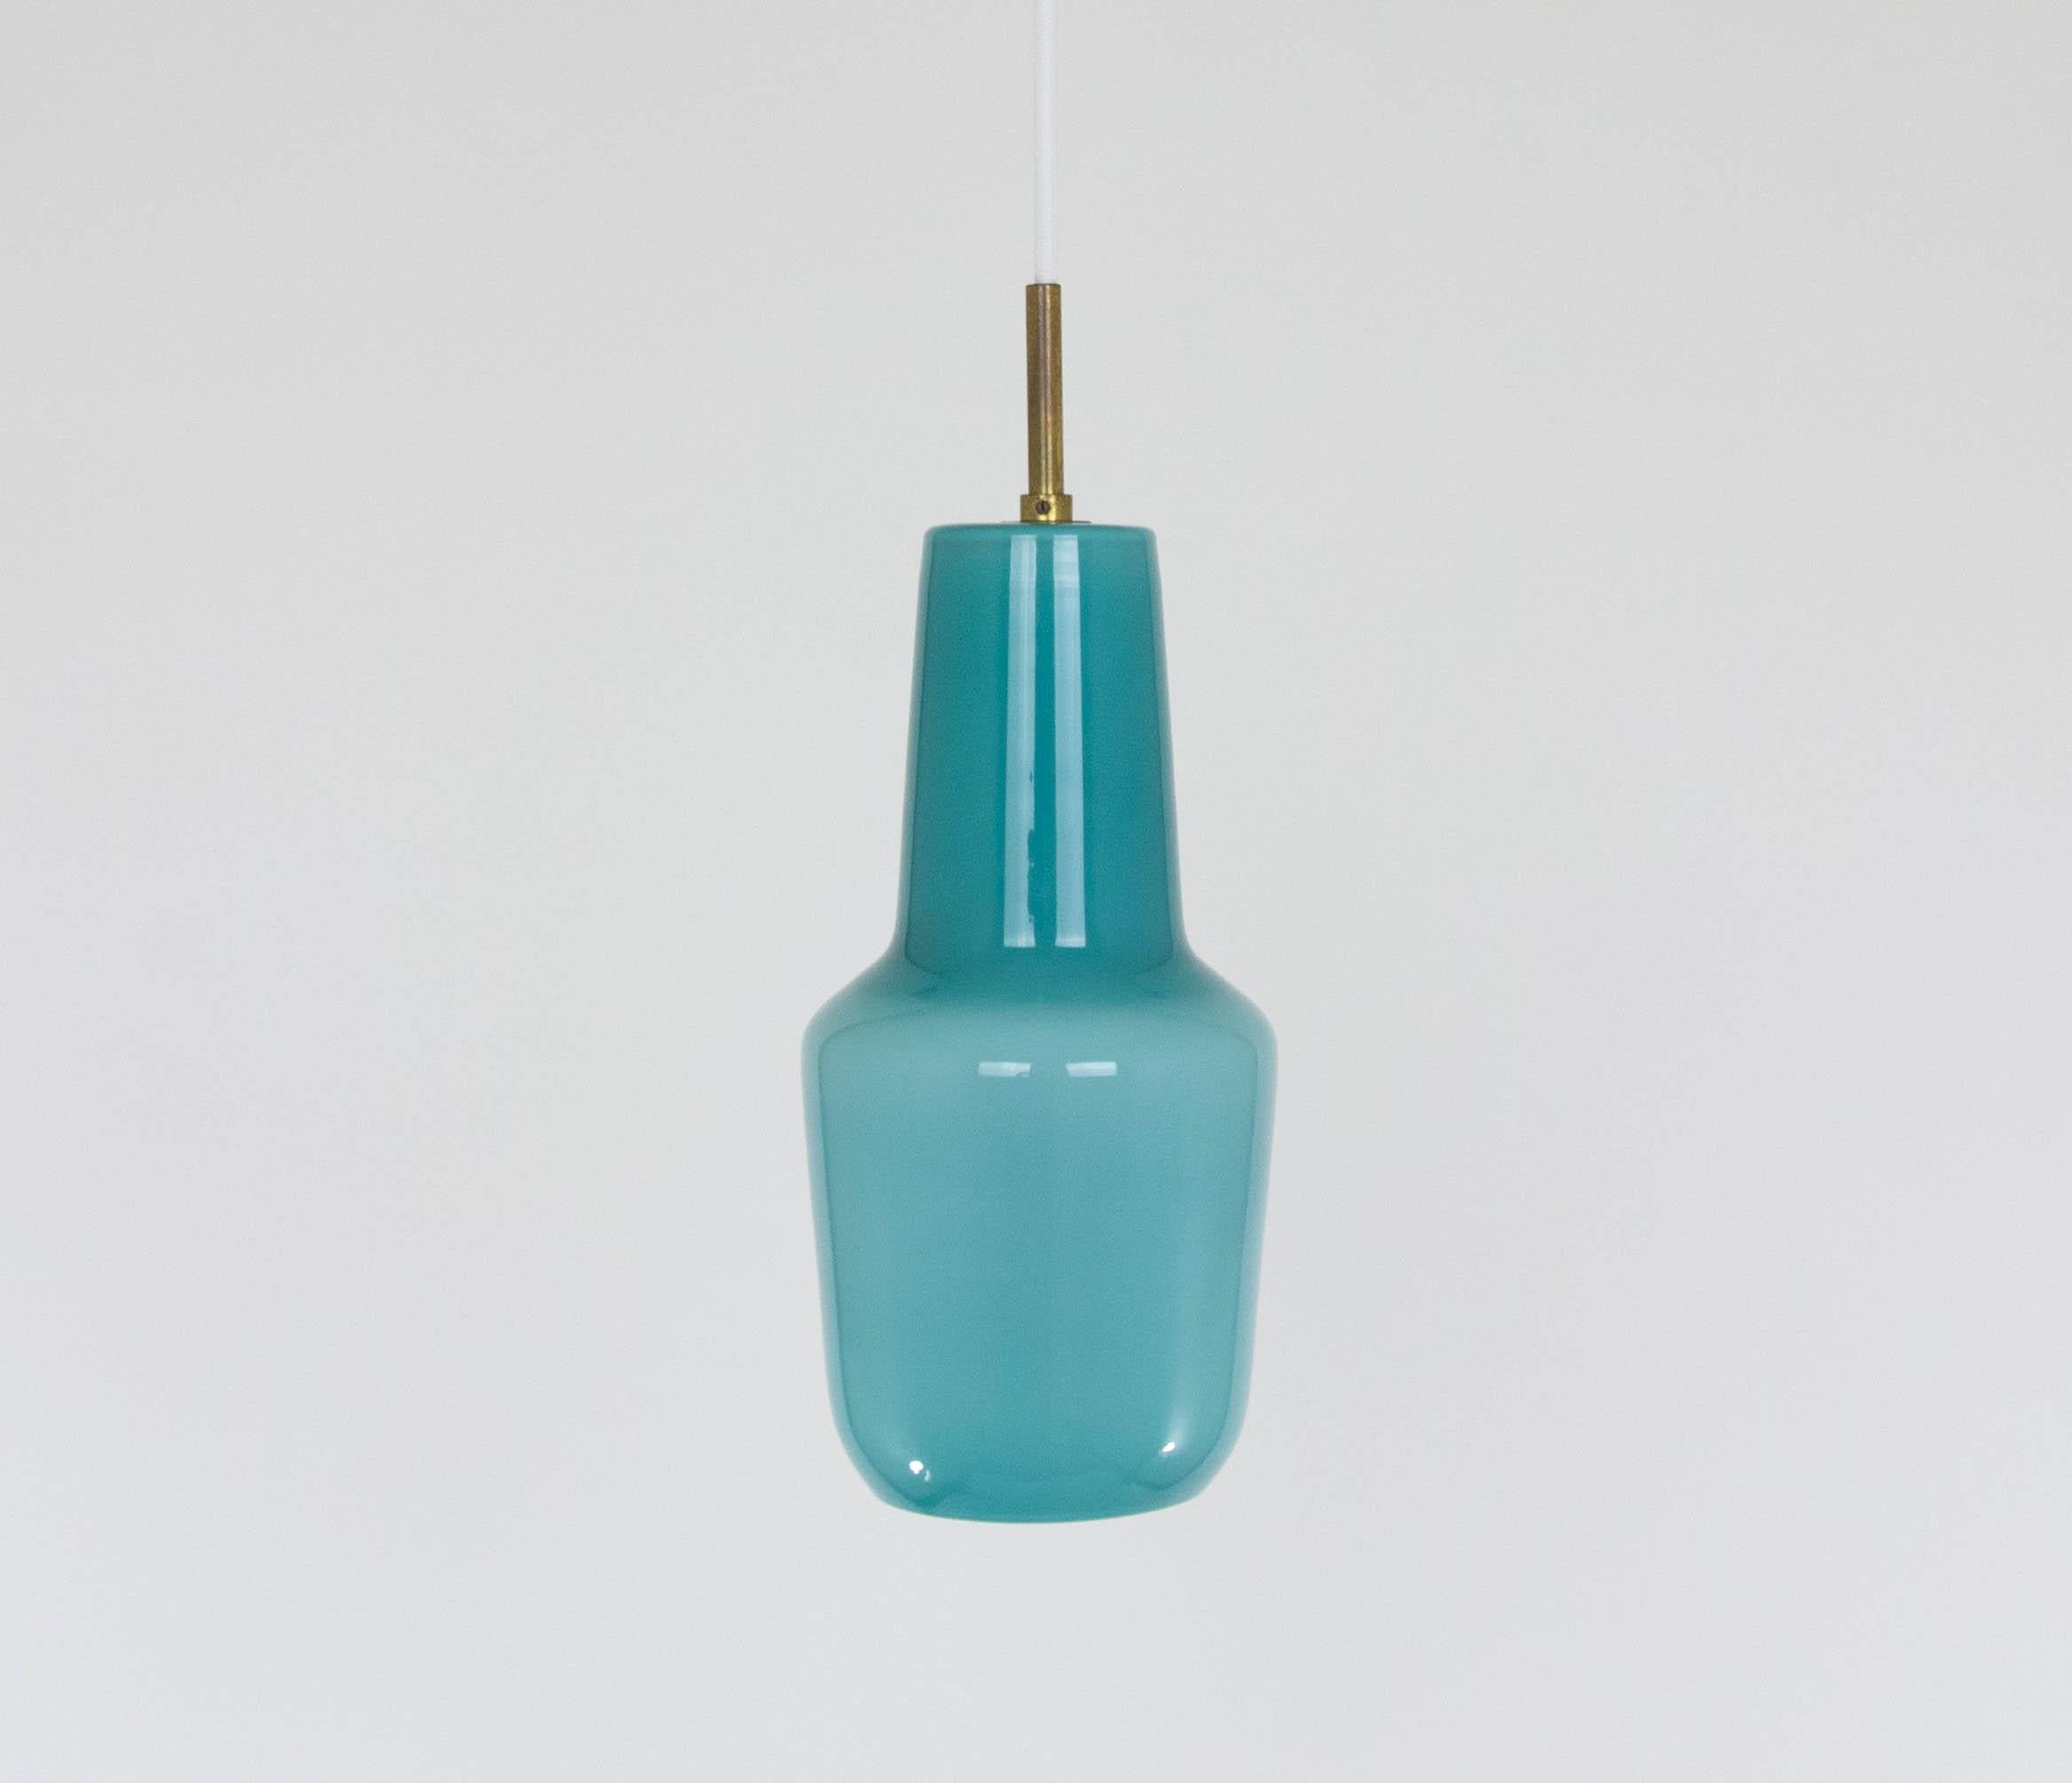 Hand blown turquoise glass pendant designed by Massimo Vignelli at the start of his impressive career in design and produced by Murano glass specialist Venini.

This model was made in three sizes: 25 cm, 30 cm and 39 cm high. This one is the